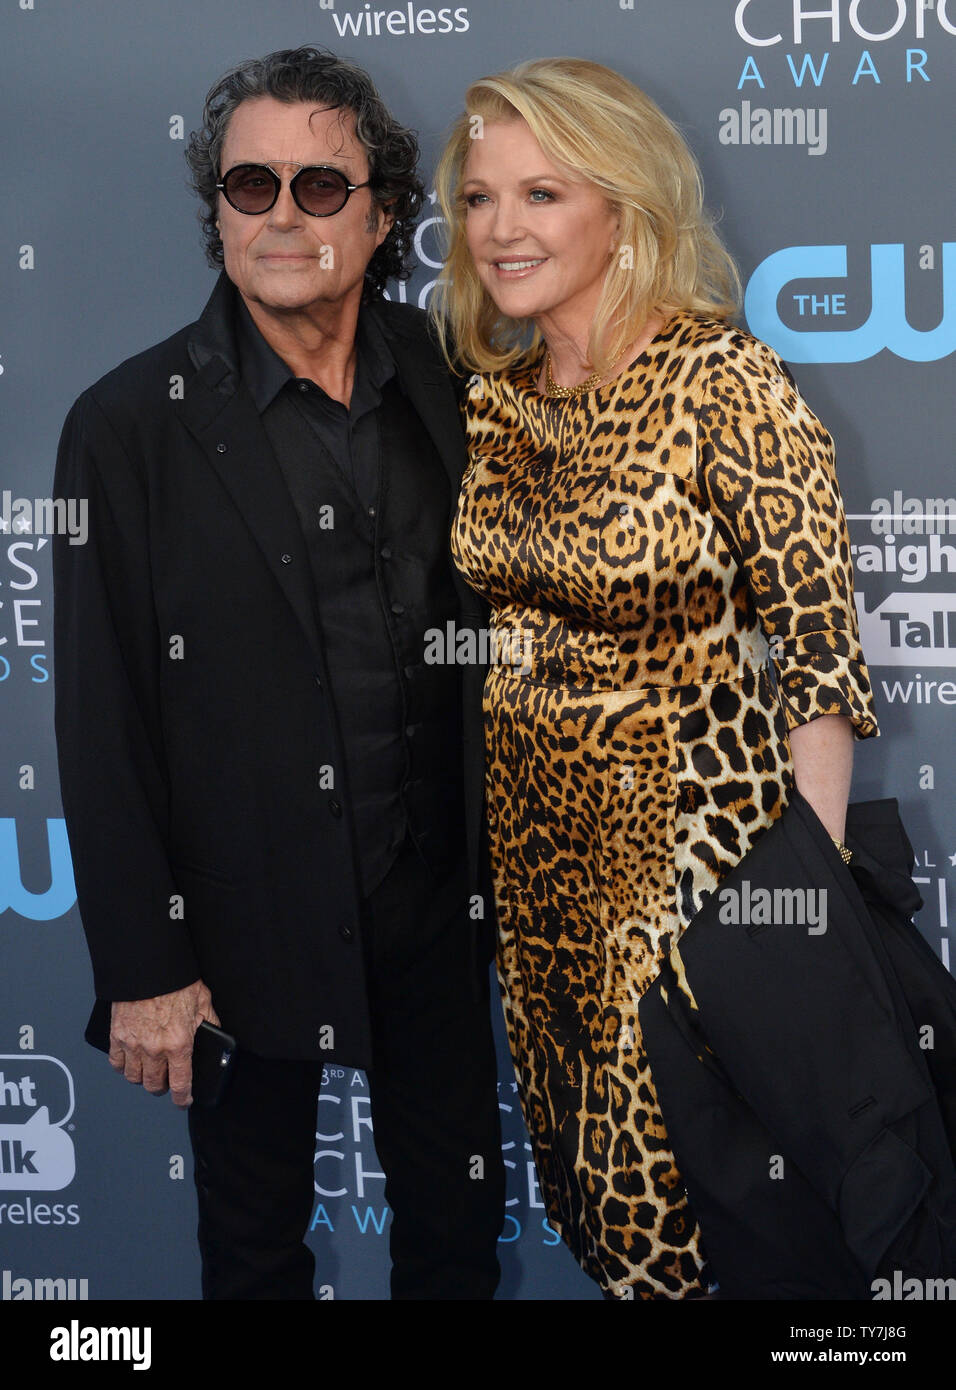 Actor Ian McShane and his wife Gwen Humble attend the 23rd annual Critics' Choice Awards at Barker Hanger in Santa Monica, California on December 11, 2018. Photo by Jim Ruymen/UPI Stock Photo